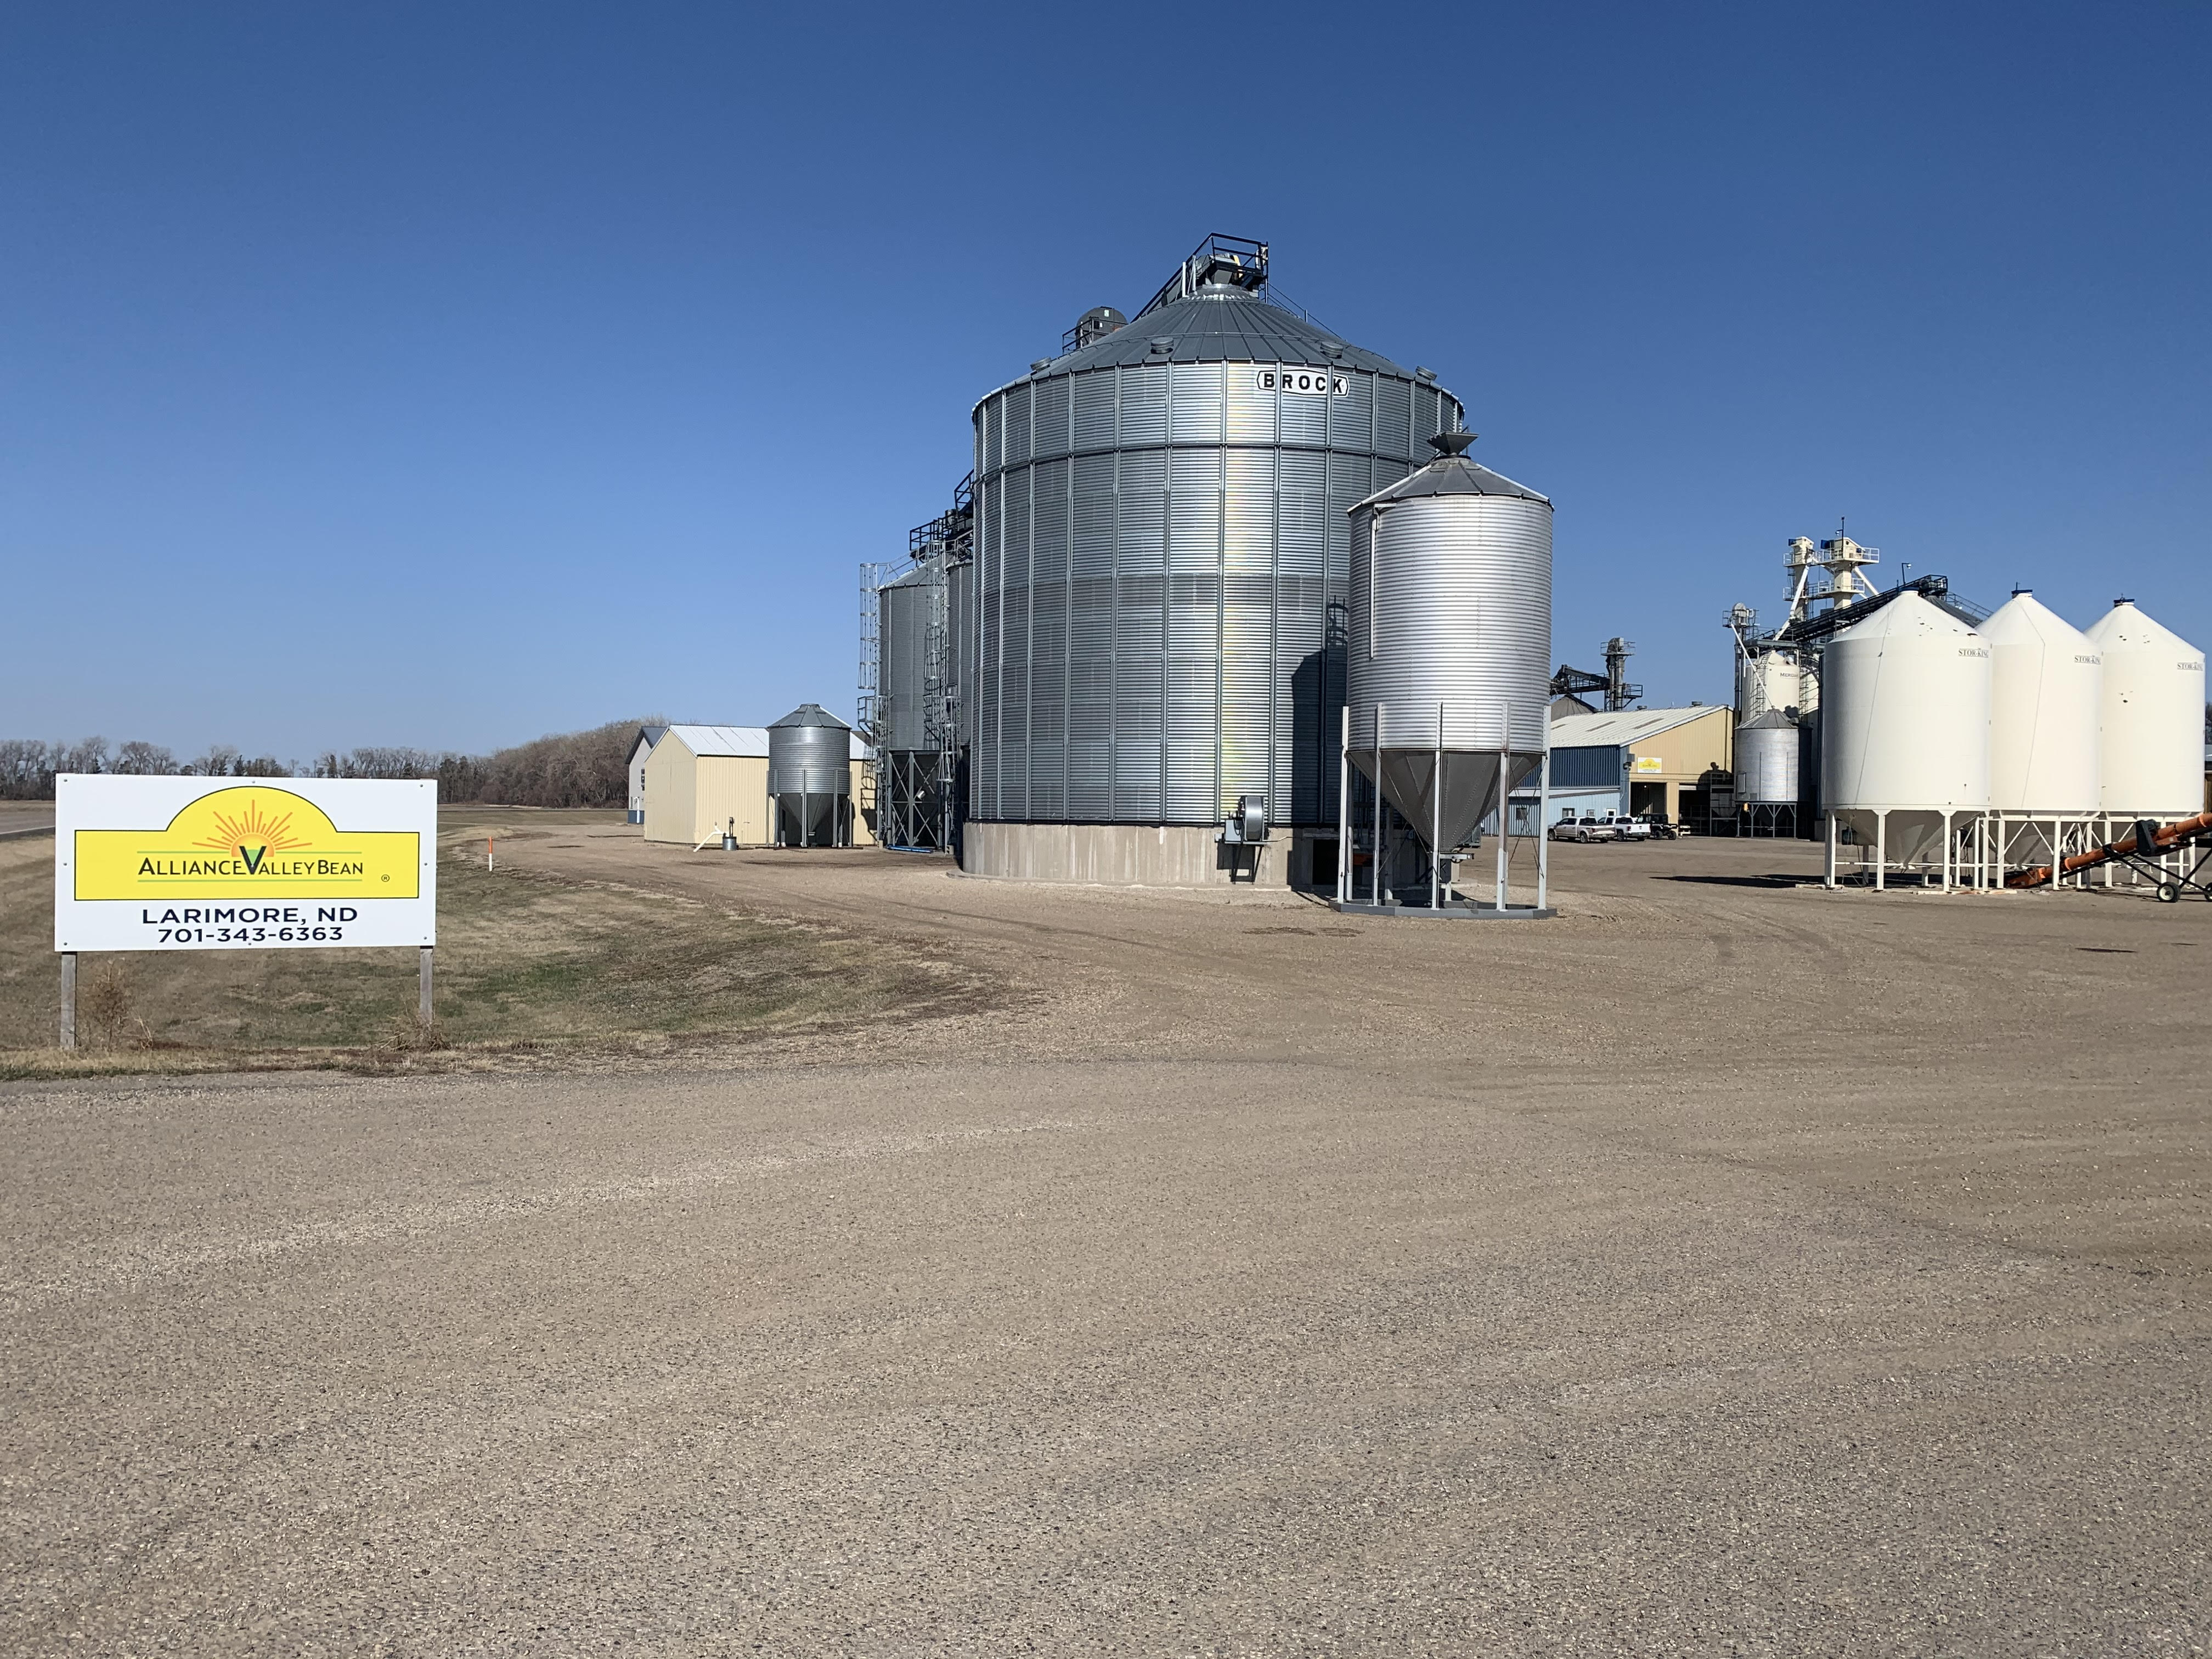 Afternoon Ag News, April 26, 2021: We travel to Larimore, ND to talk black bean production